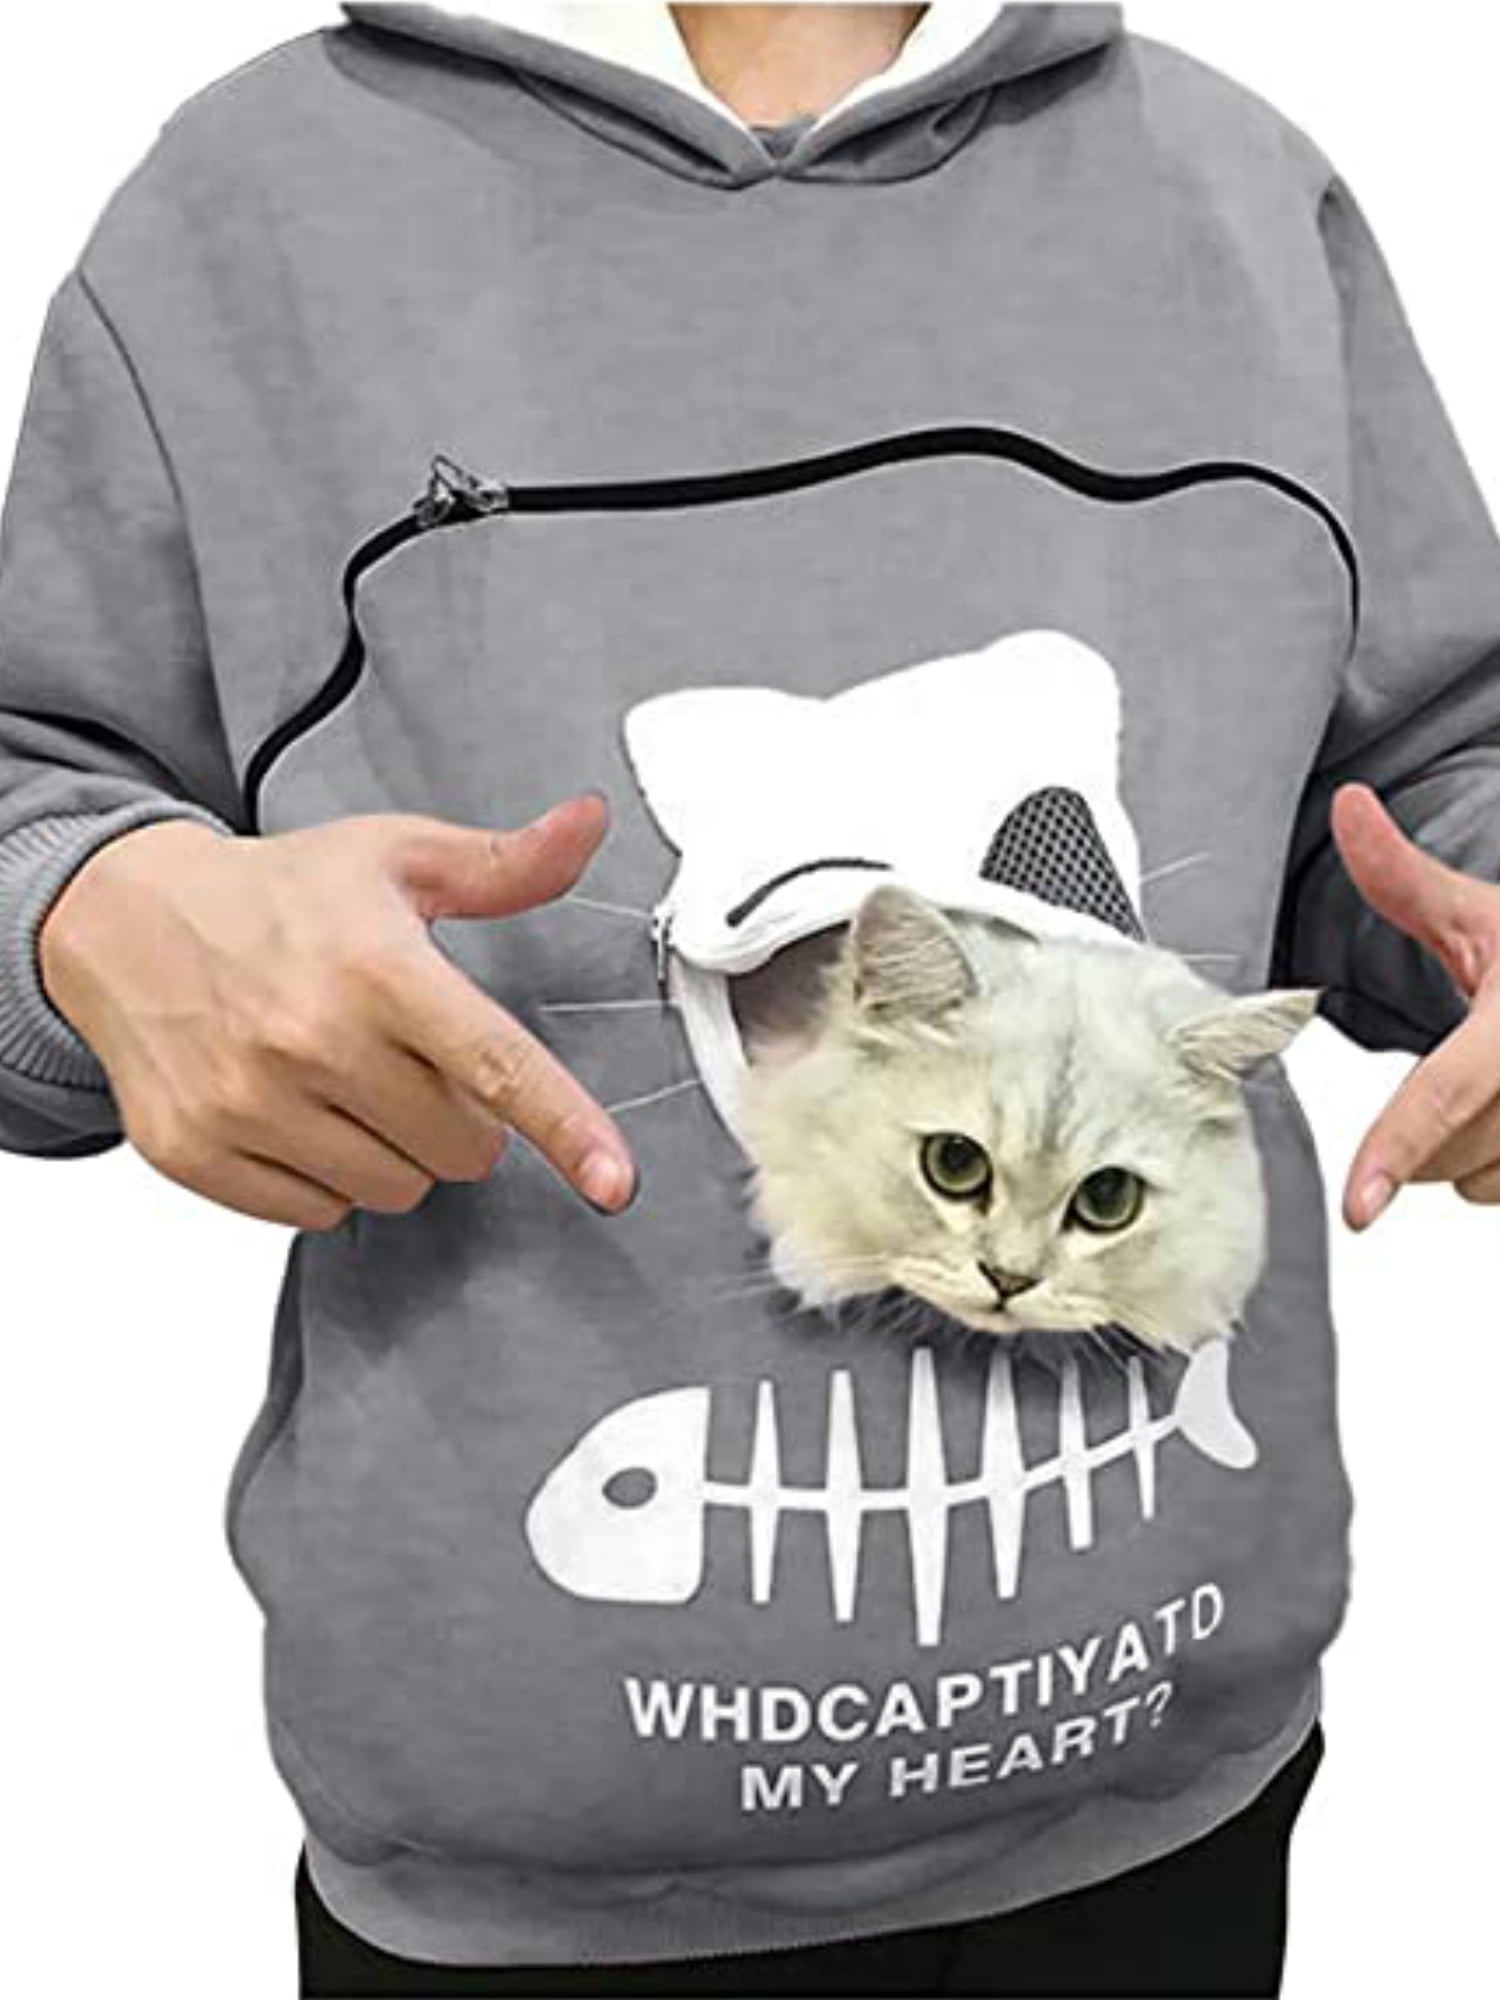 Big Pouch Hoodie with Zipper for Dogs Puppies Cats Kittens Pet Carrier Long Sleeve Pullover S-XXL BESBOMIG Womens Sweatshirt Trendy Pet Holder 